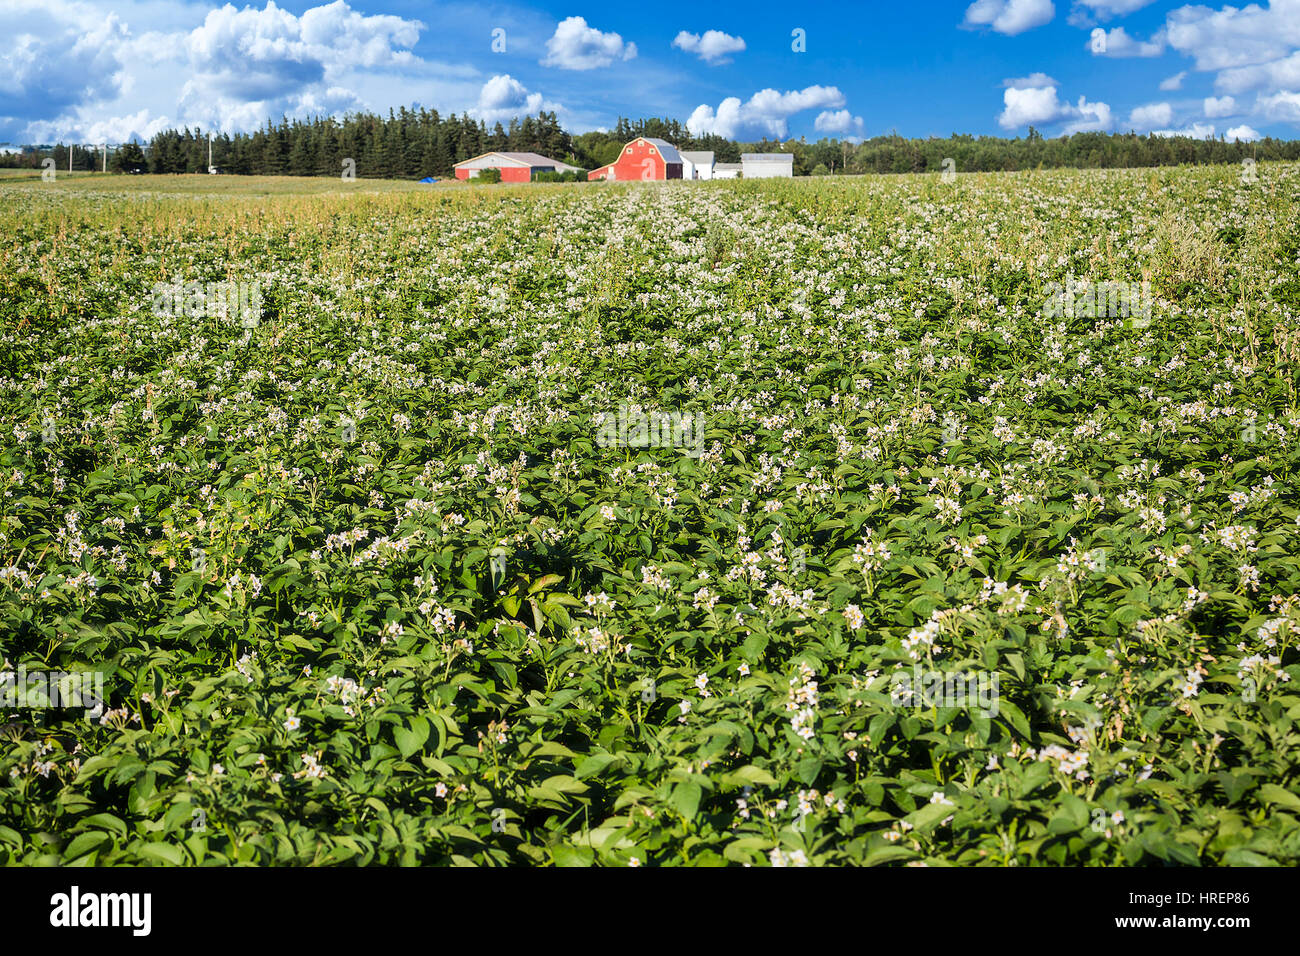 Field of healthy potatoes with potato warehouses off in the distance, in rural Prince Edward Island, Canada. Stock Photo